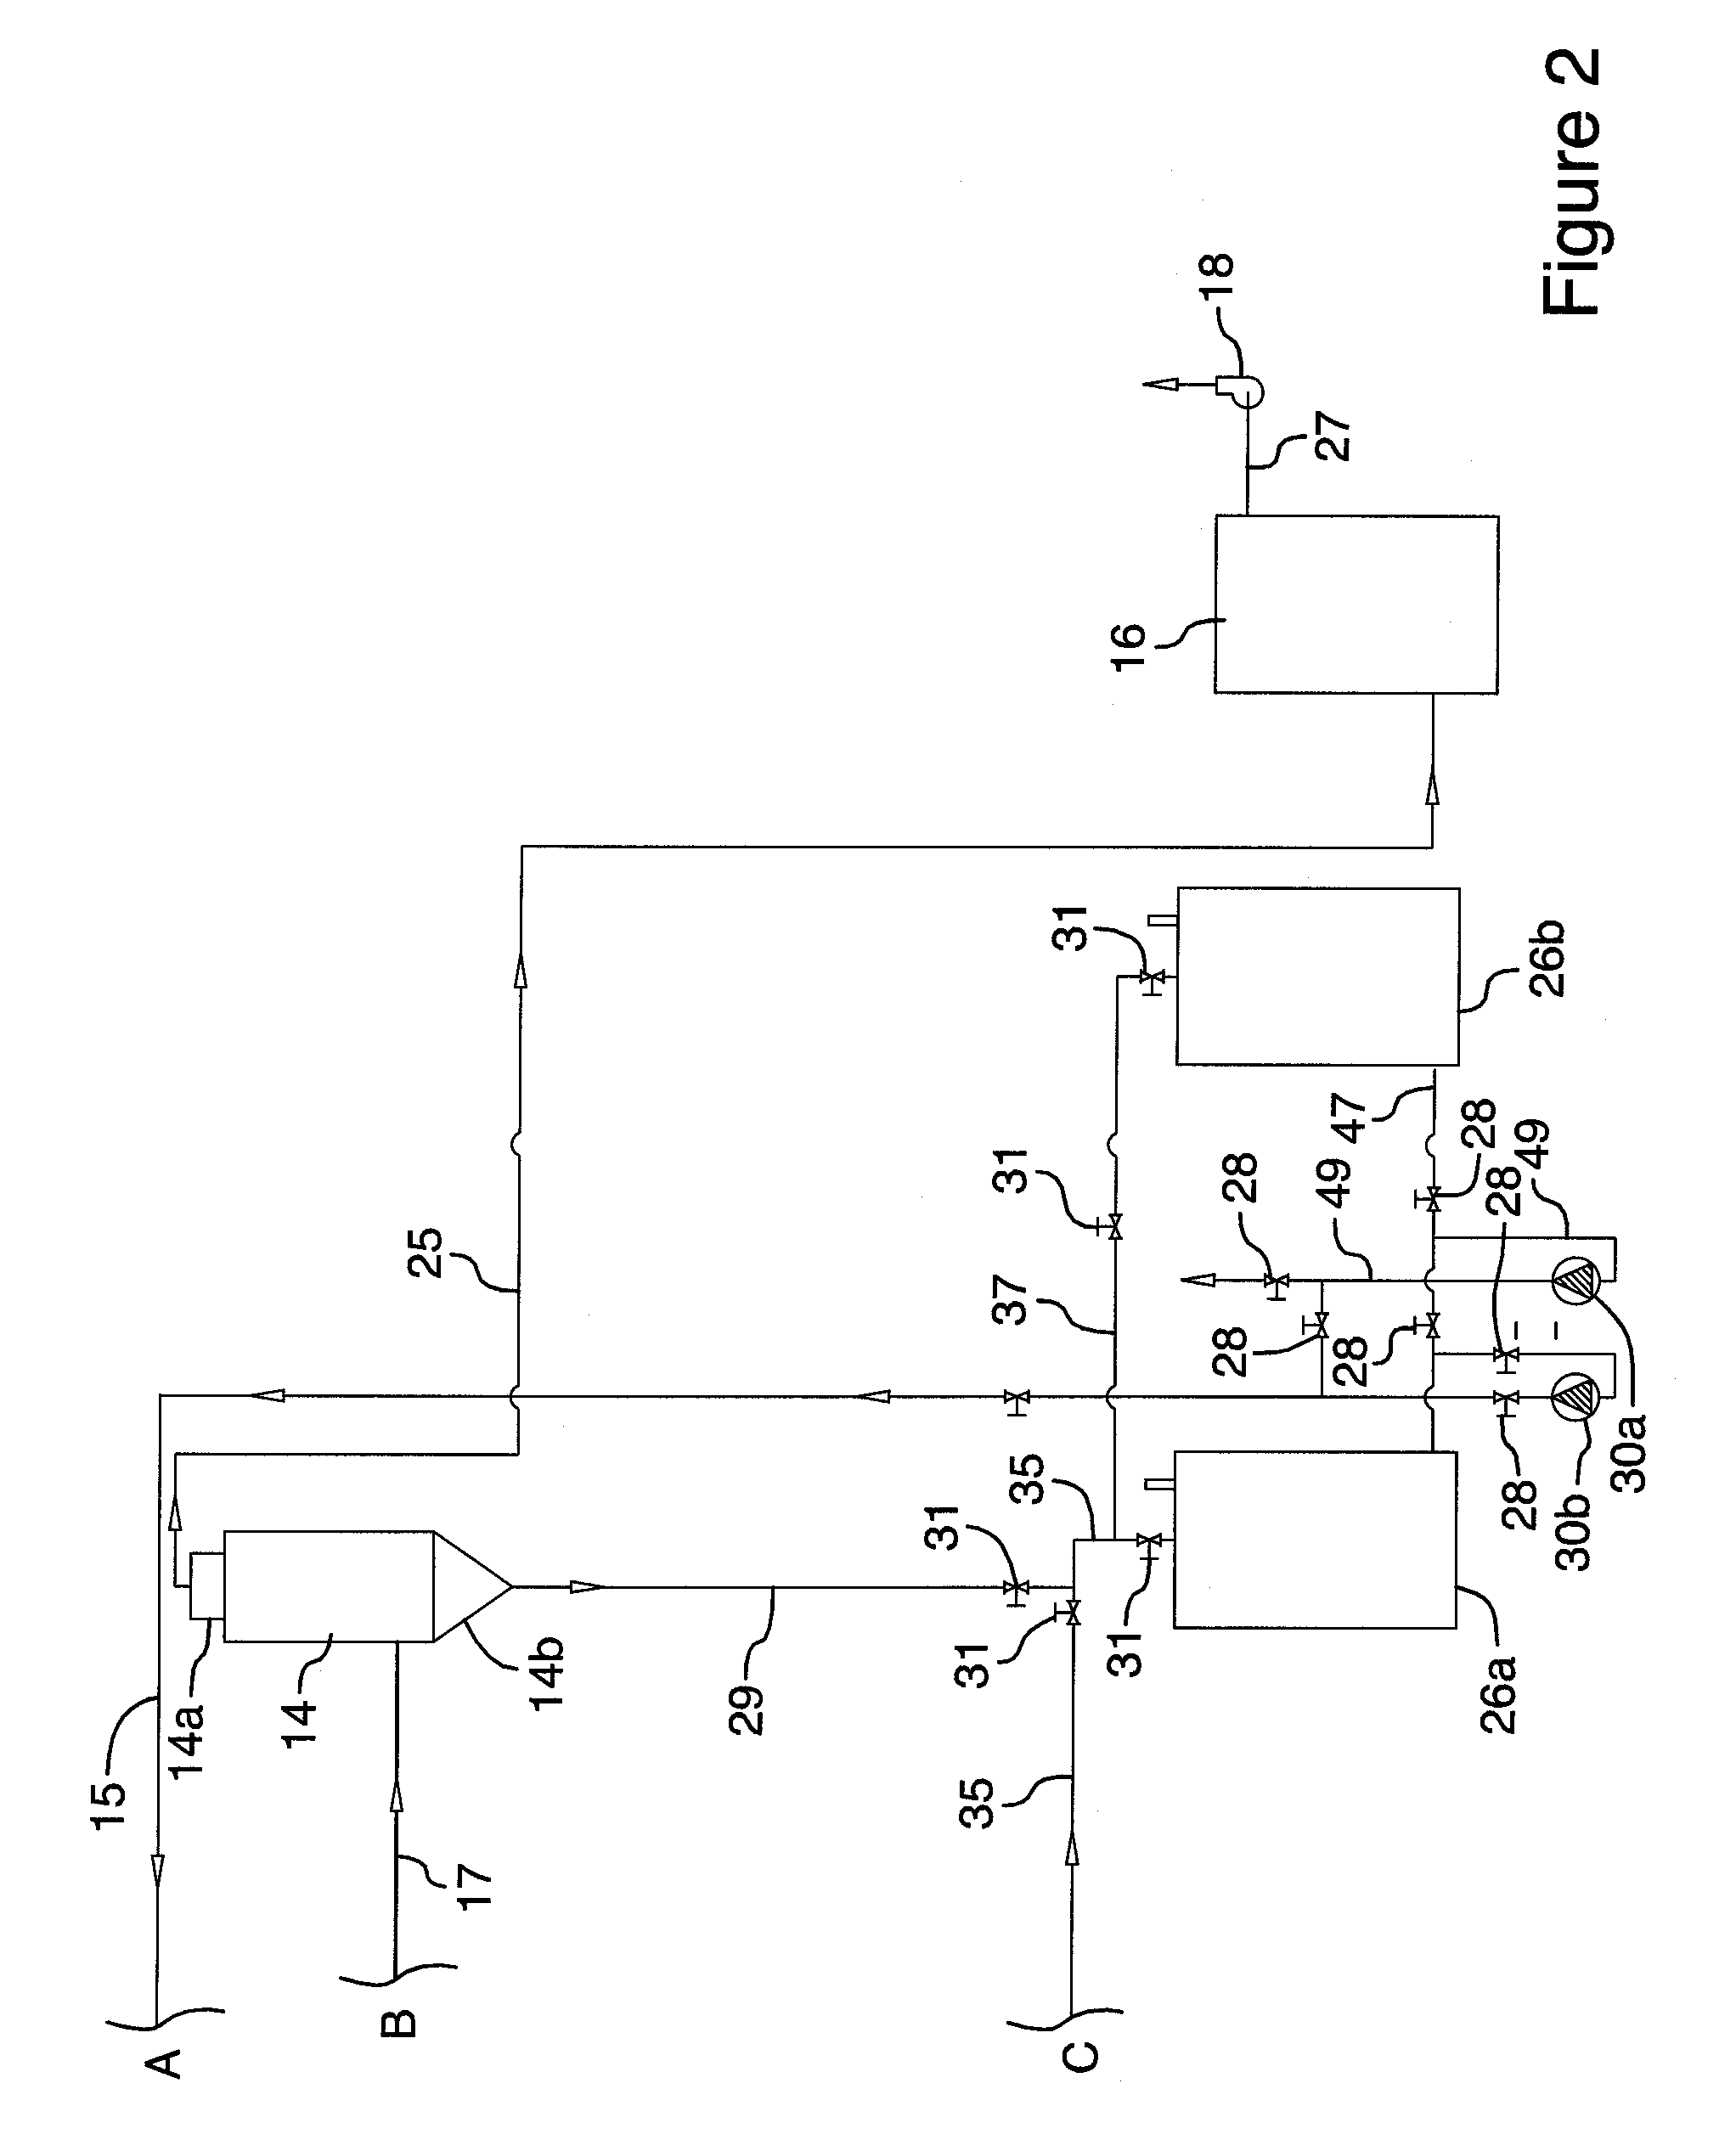 Method of reclaiming carbonaceous materials from scrap tires and products derived therefrom